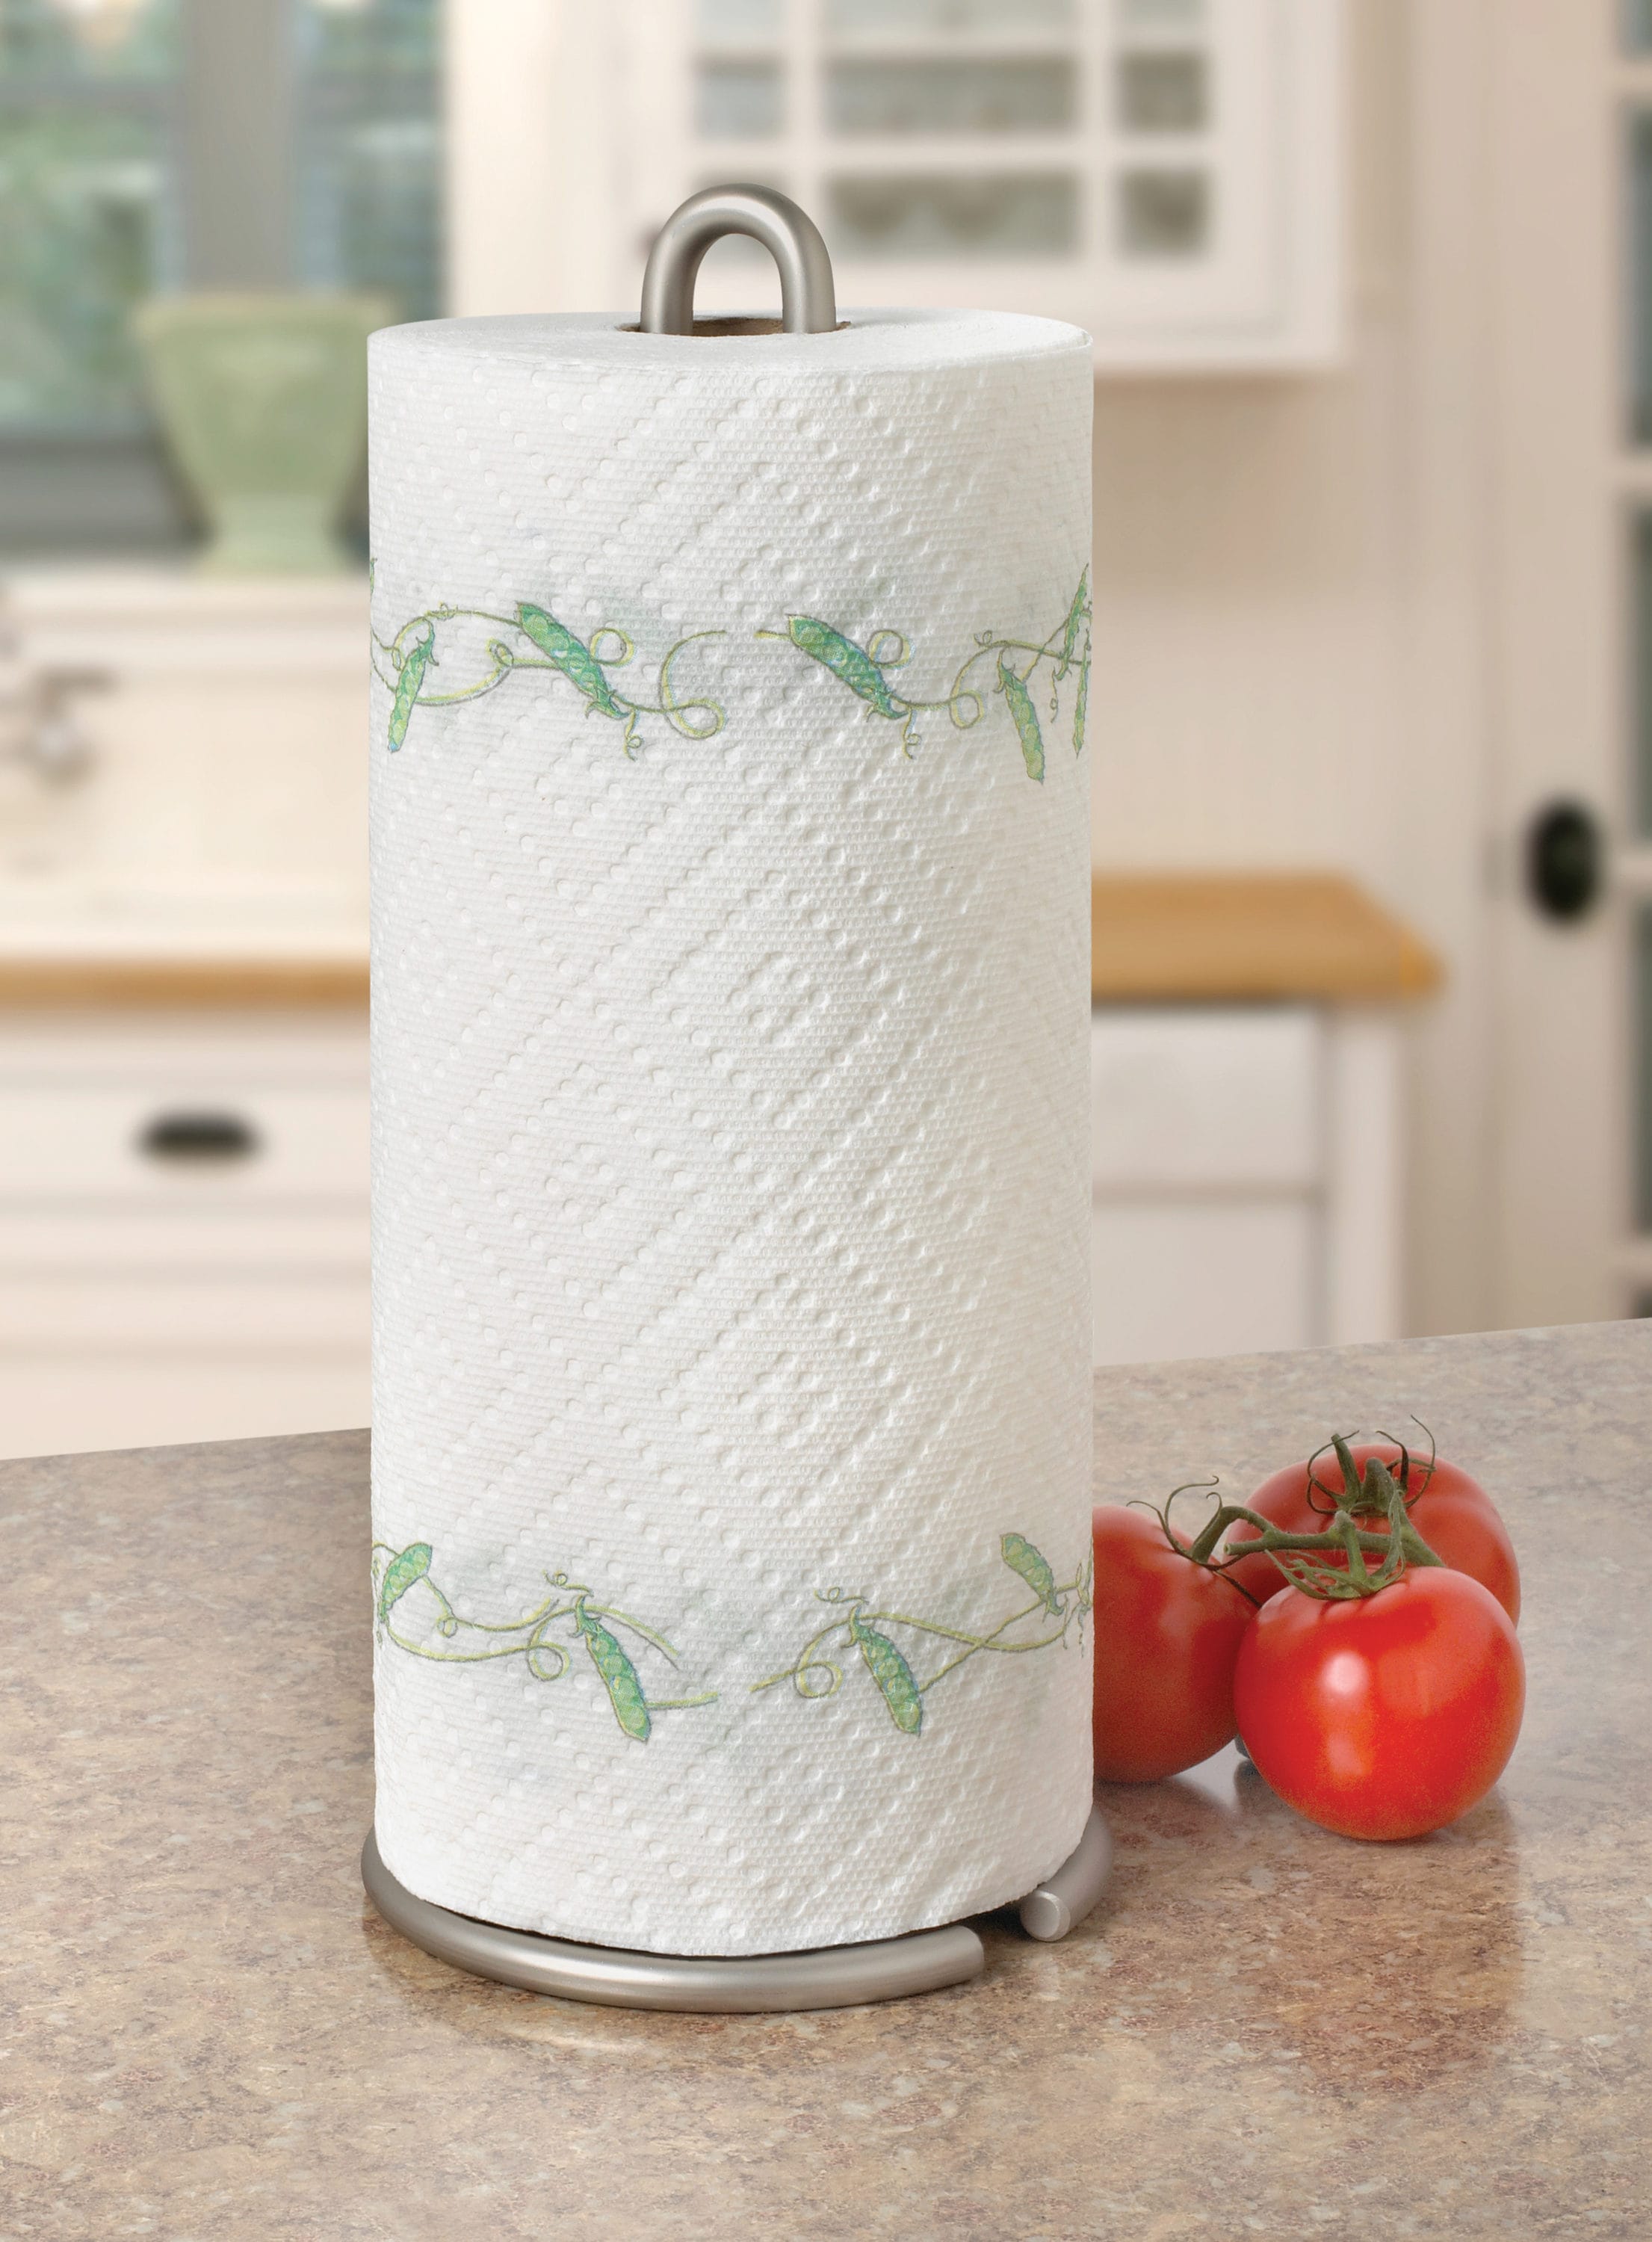 Style Selections Nickel Metal Undercabinet Paper Towel Holder in the Paper  Towel Holders department at